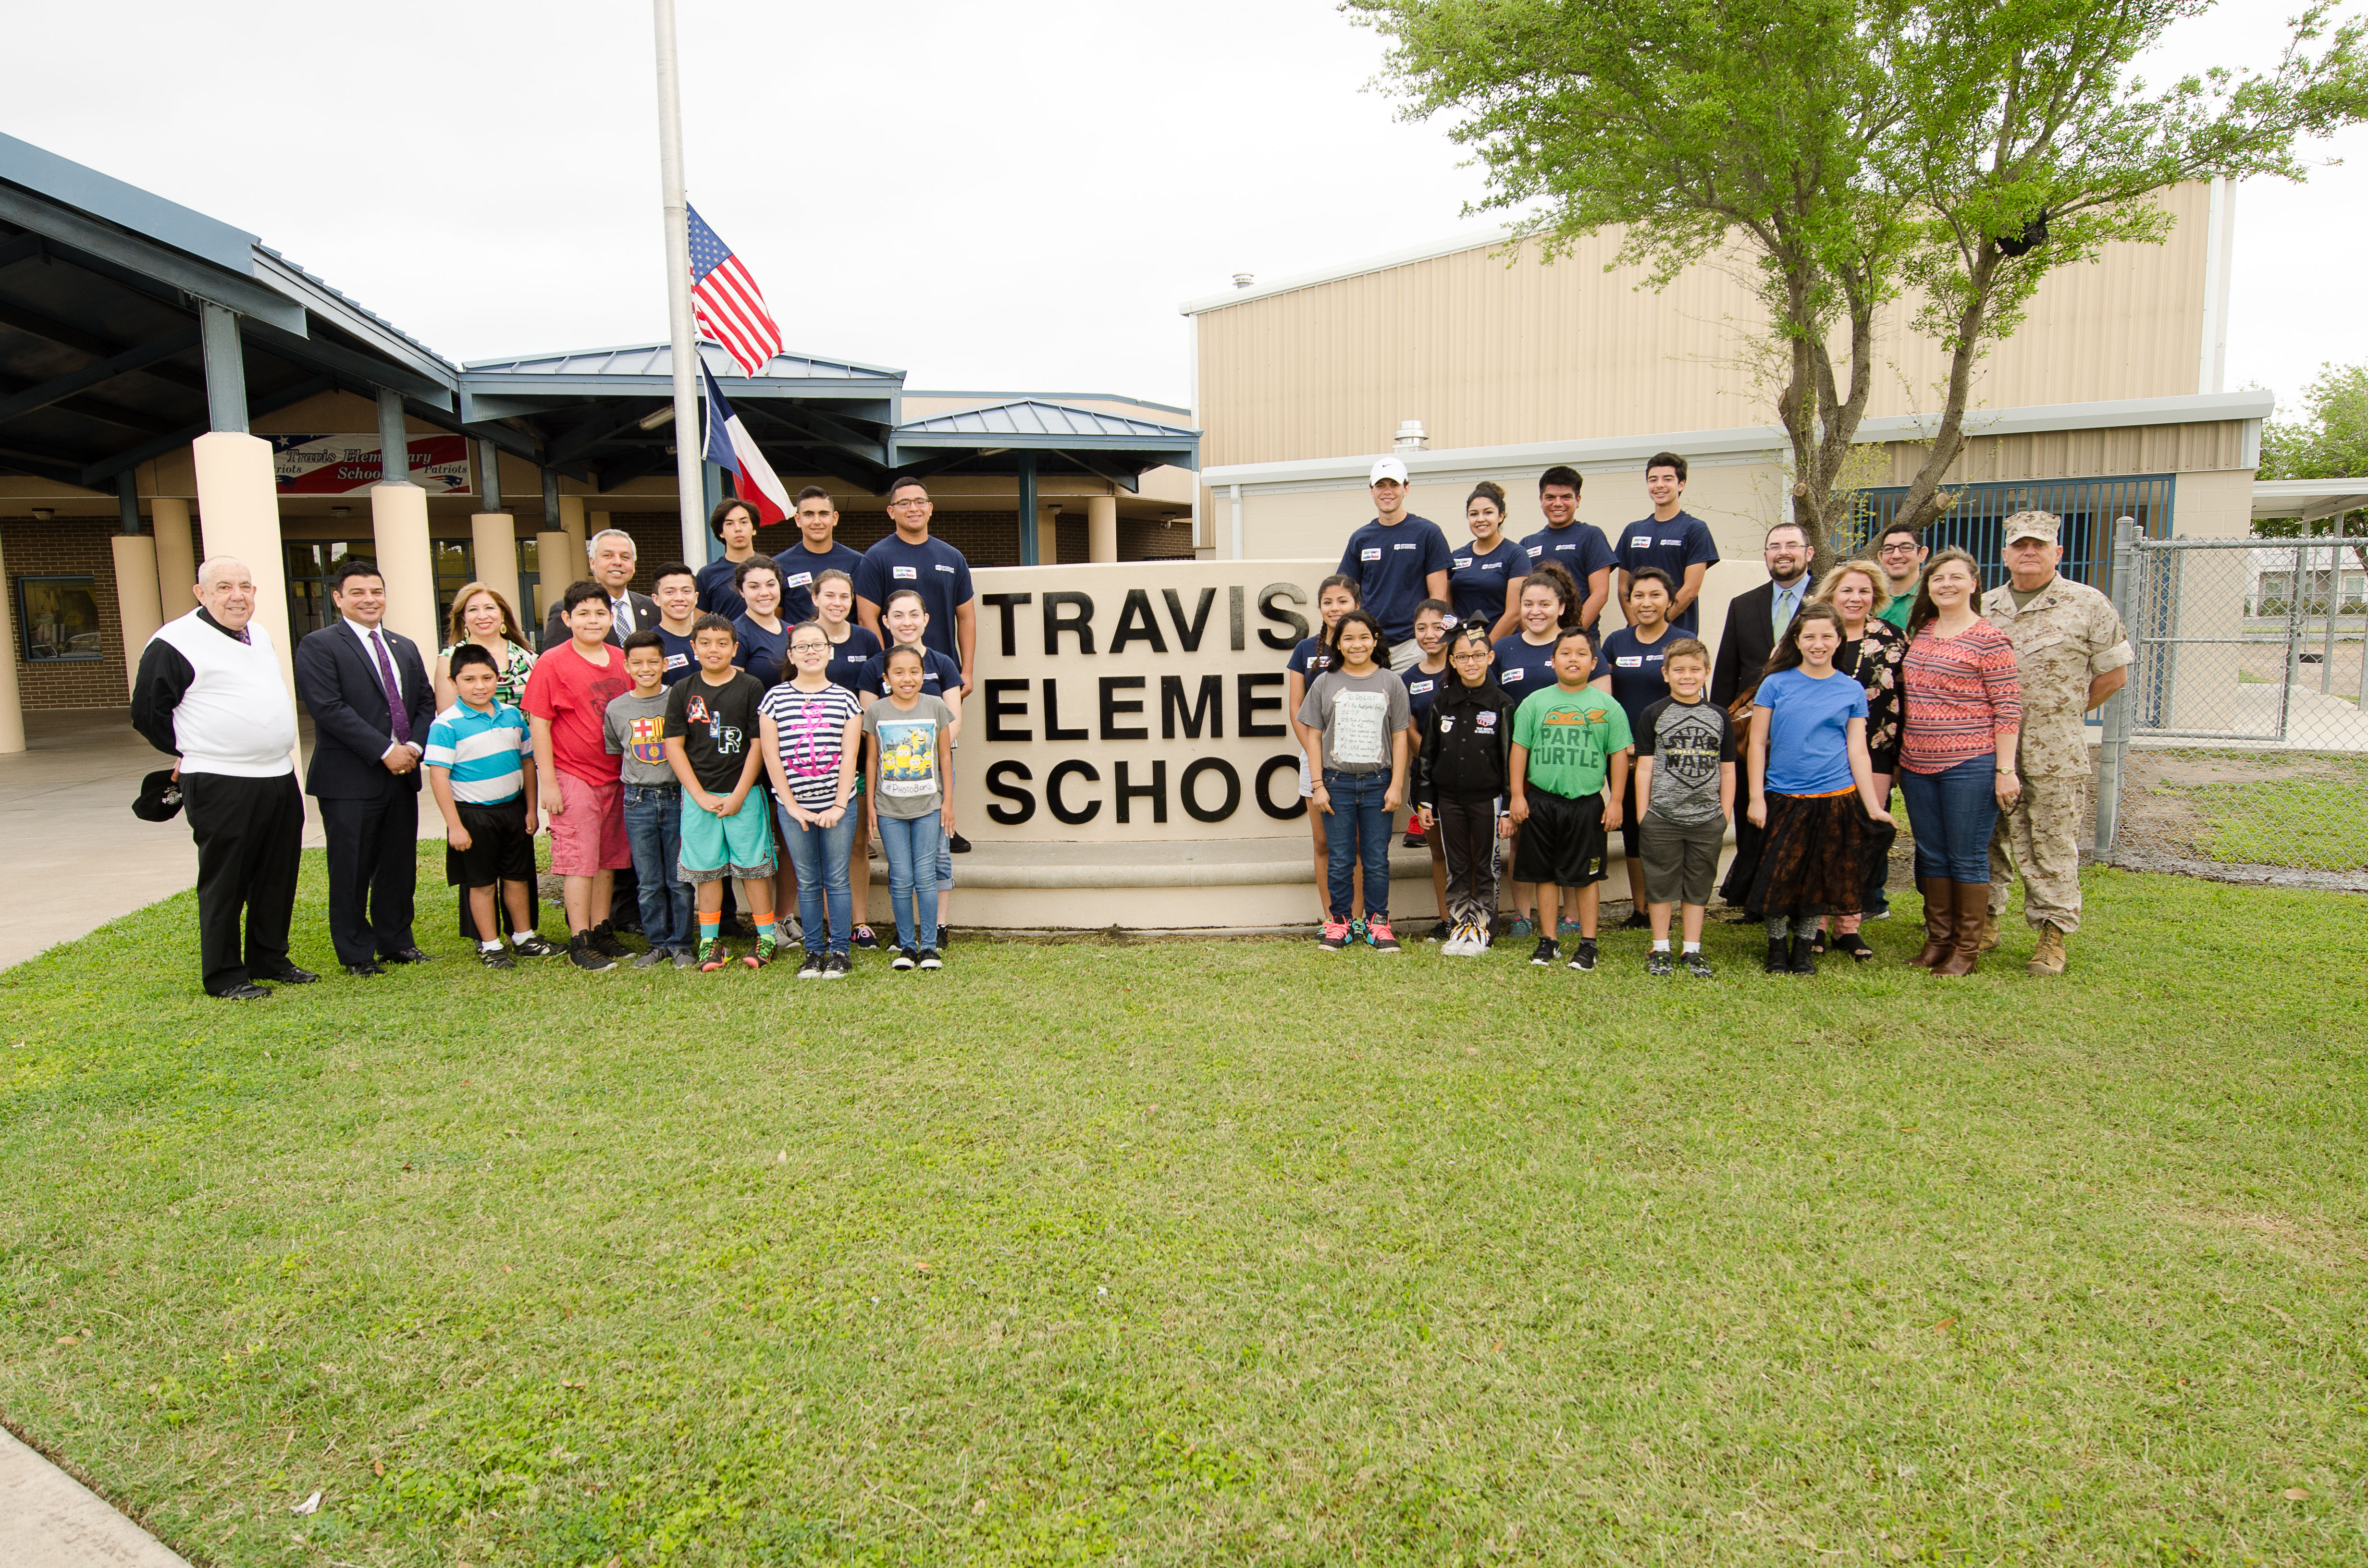 Student Advisory Board and Keep Harlingen Beautiful plant trees at Travis Elementary